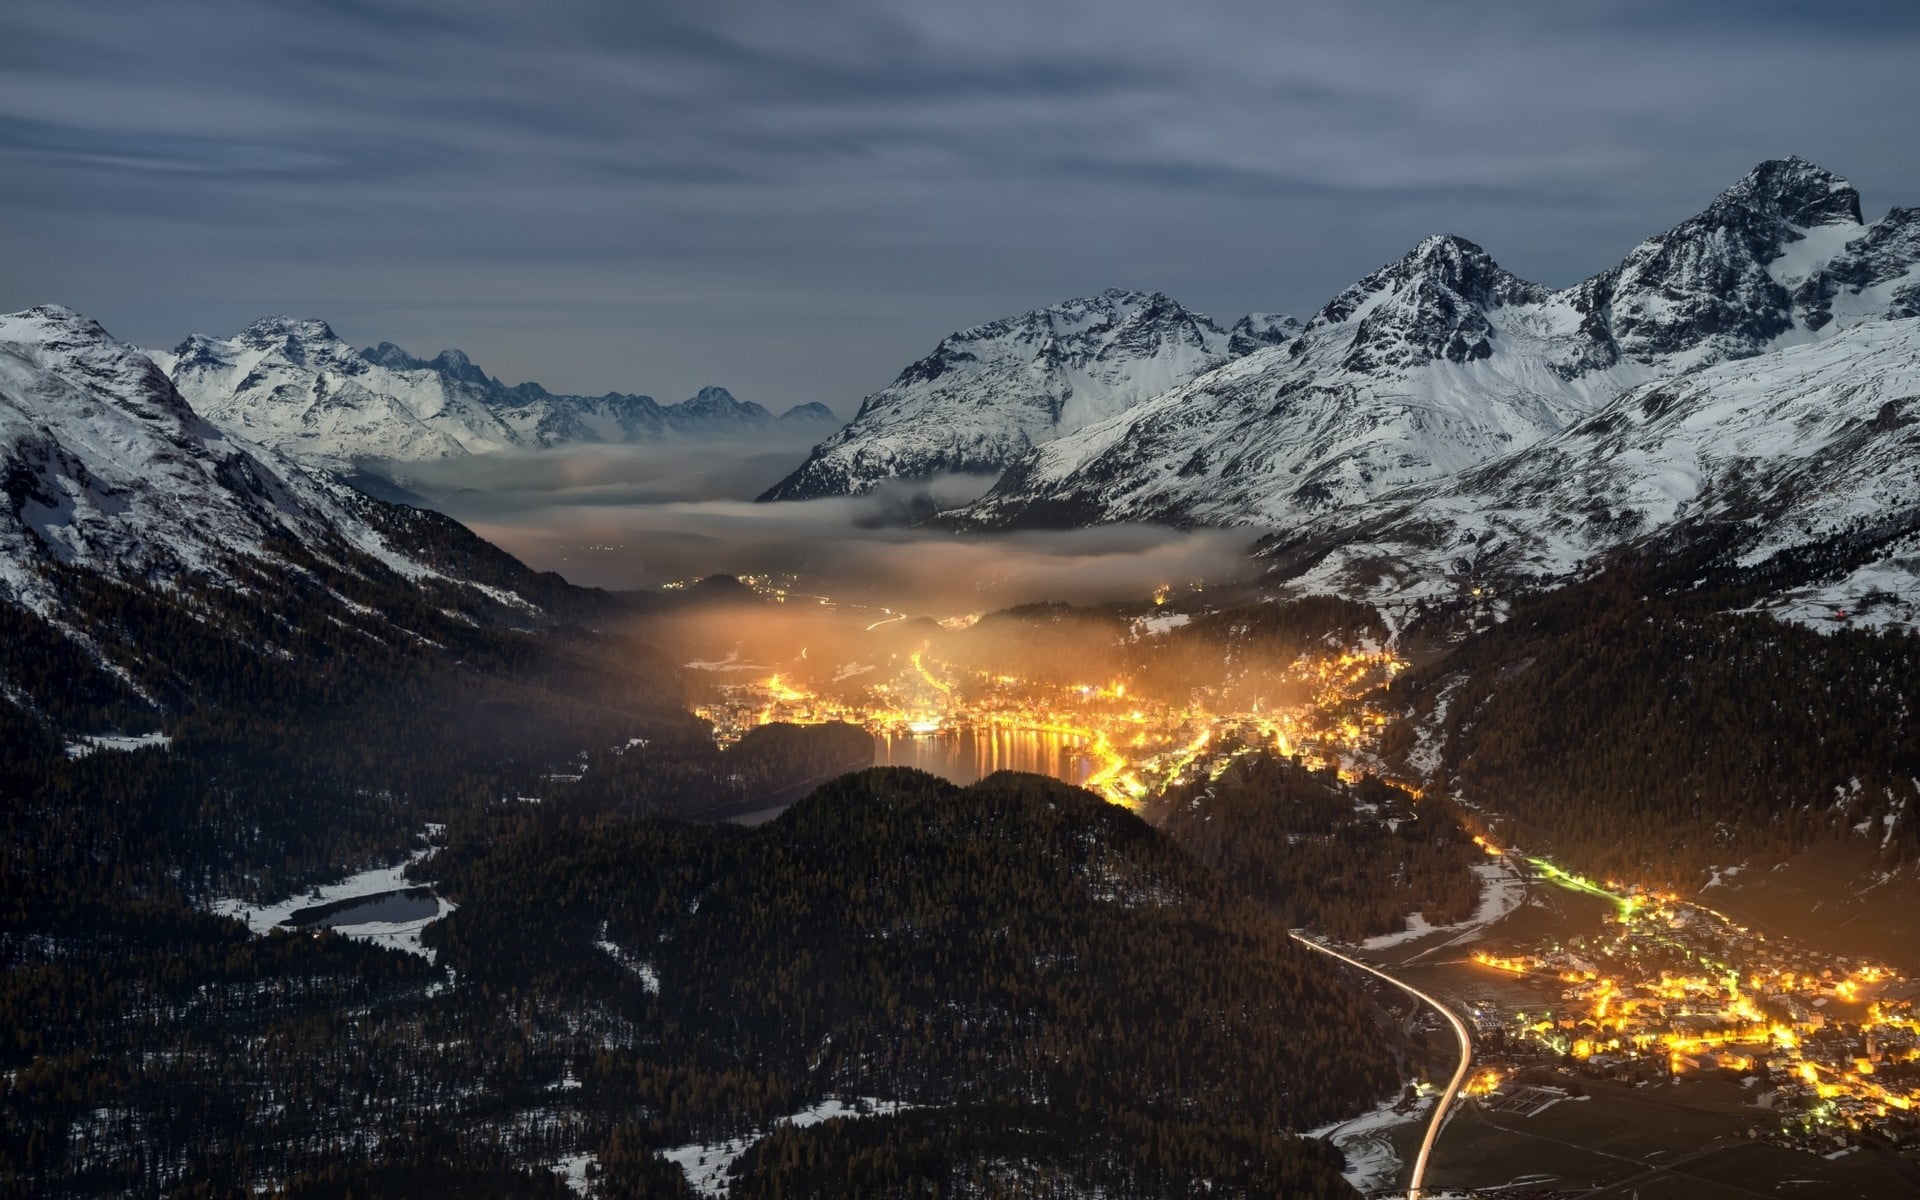 mountain covered by snow during nighttime, nature, landscape, valley, Switzerland